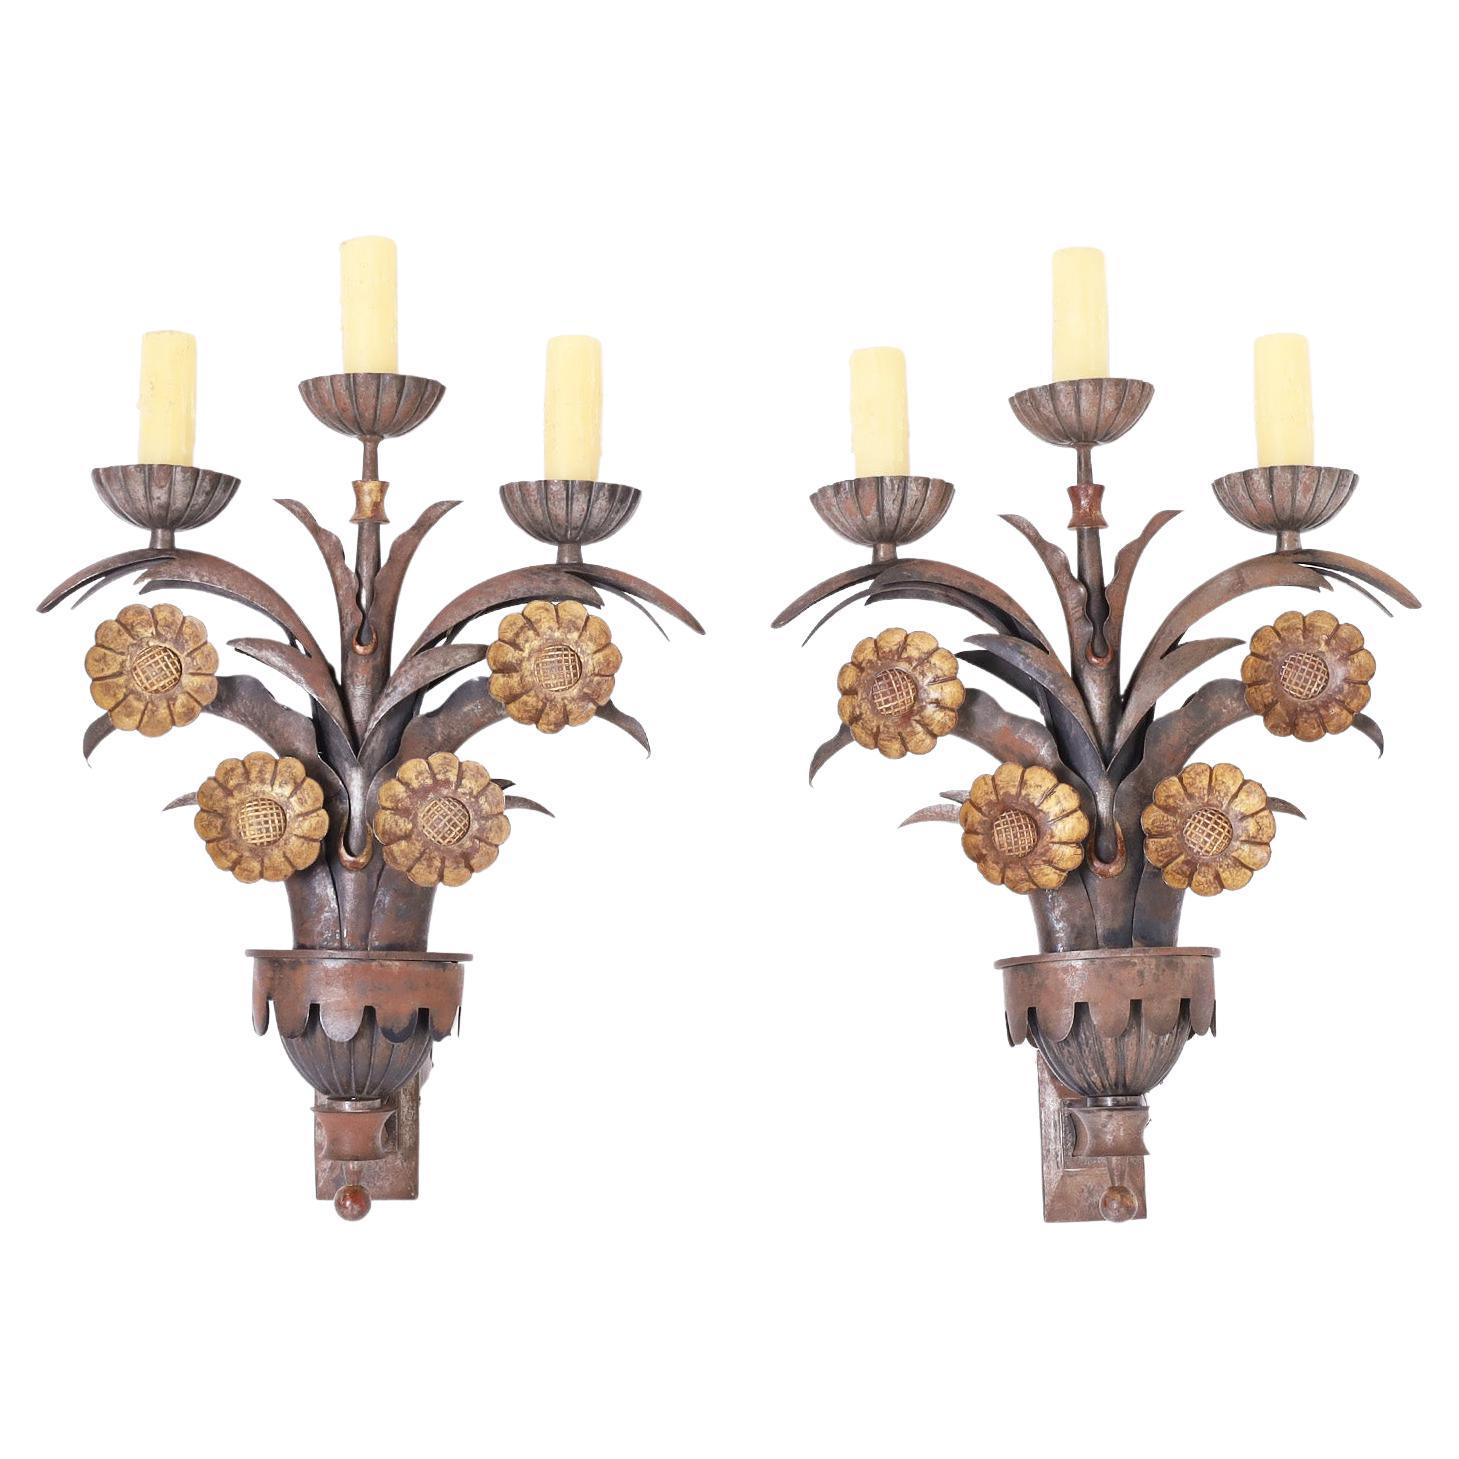 Pair of French Art Deco Floral Wall Sconces